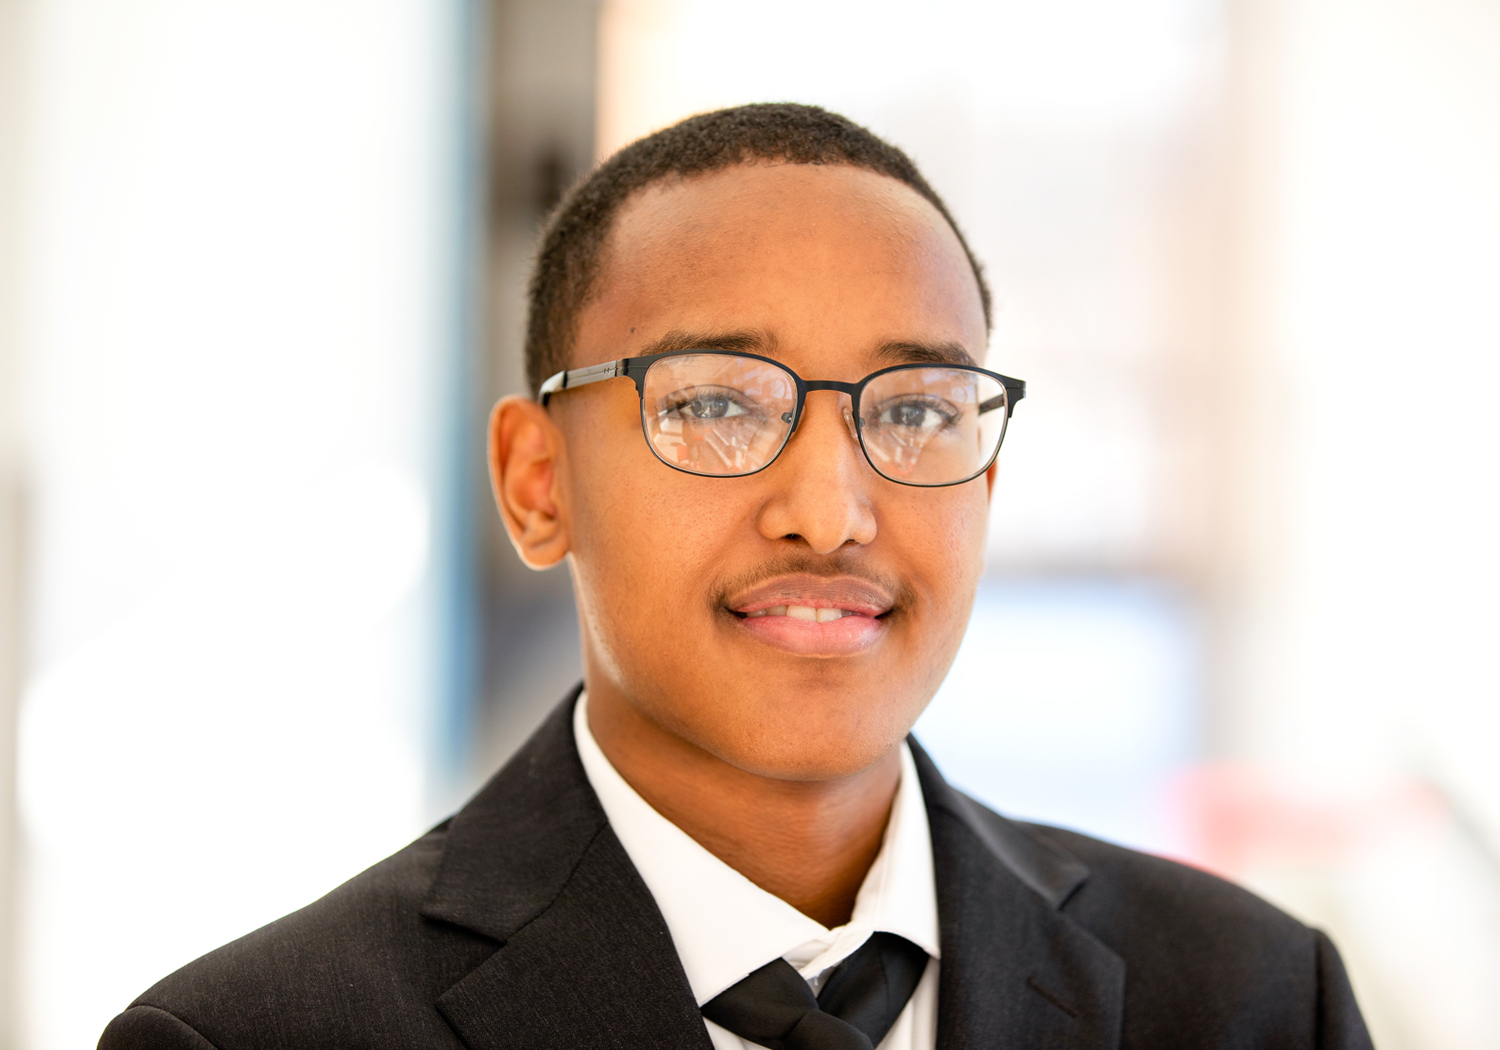 Normandale computer science student Abdirahman Abdi discusses his experience with the computer science program.